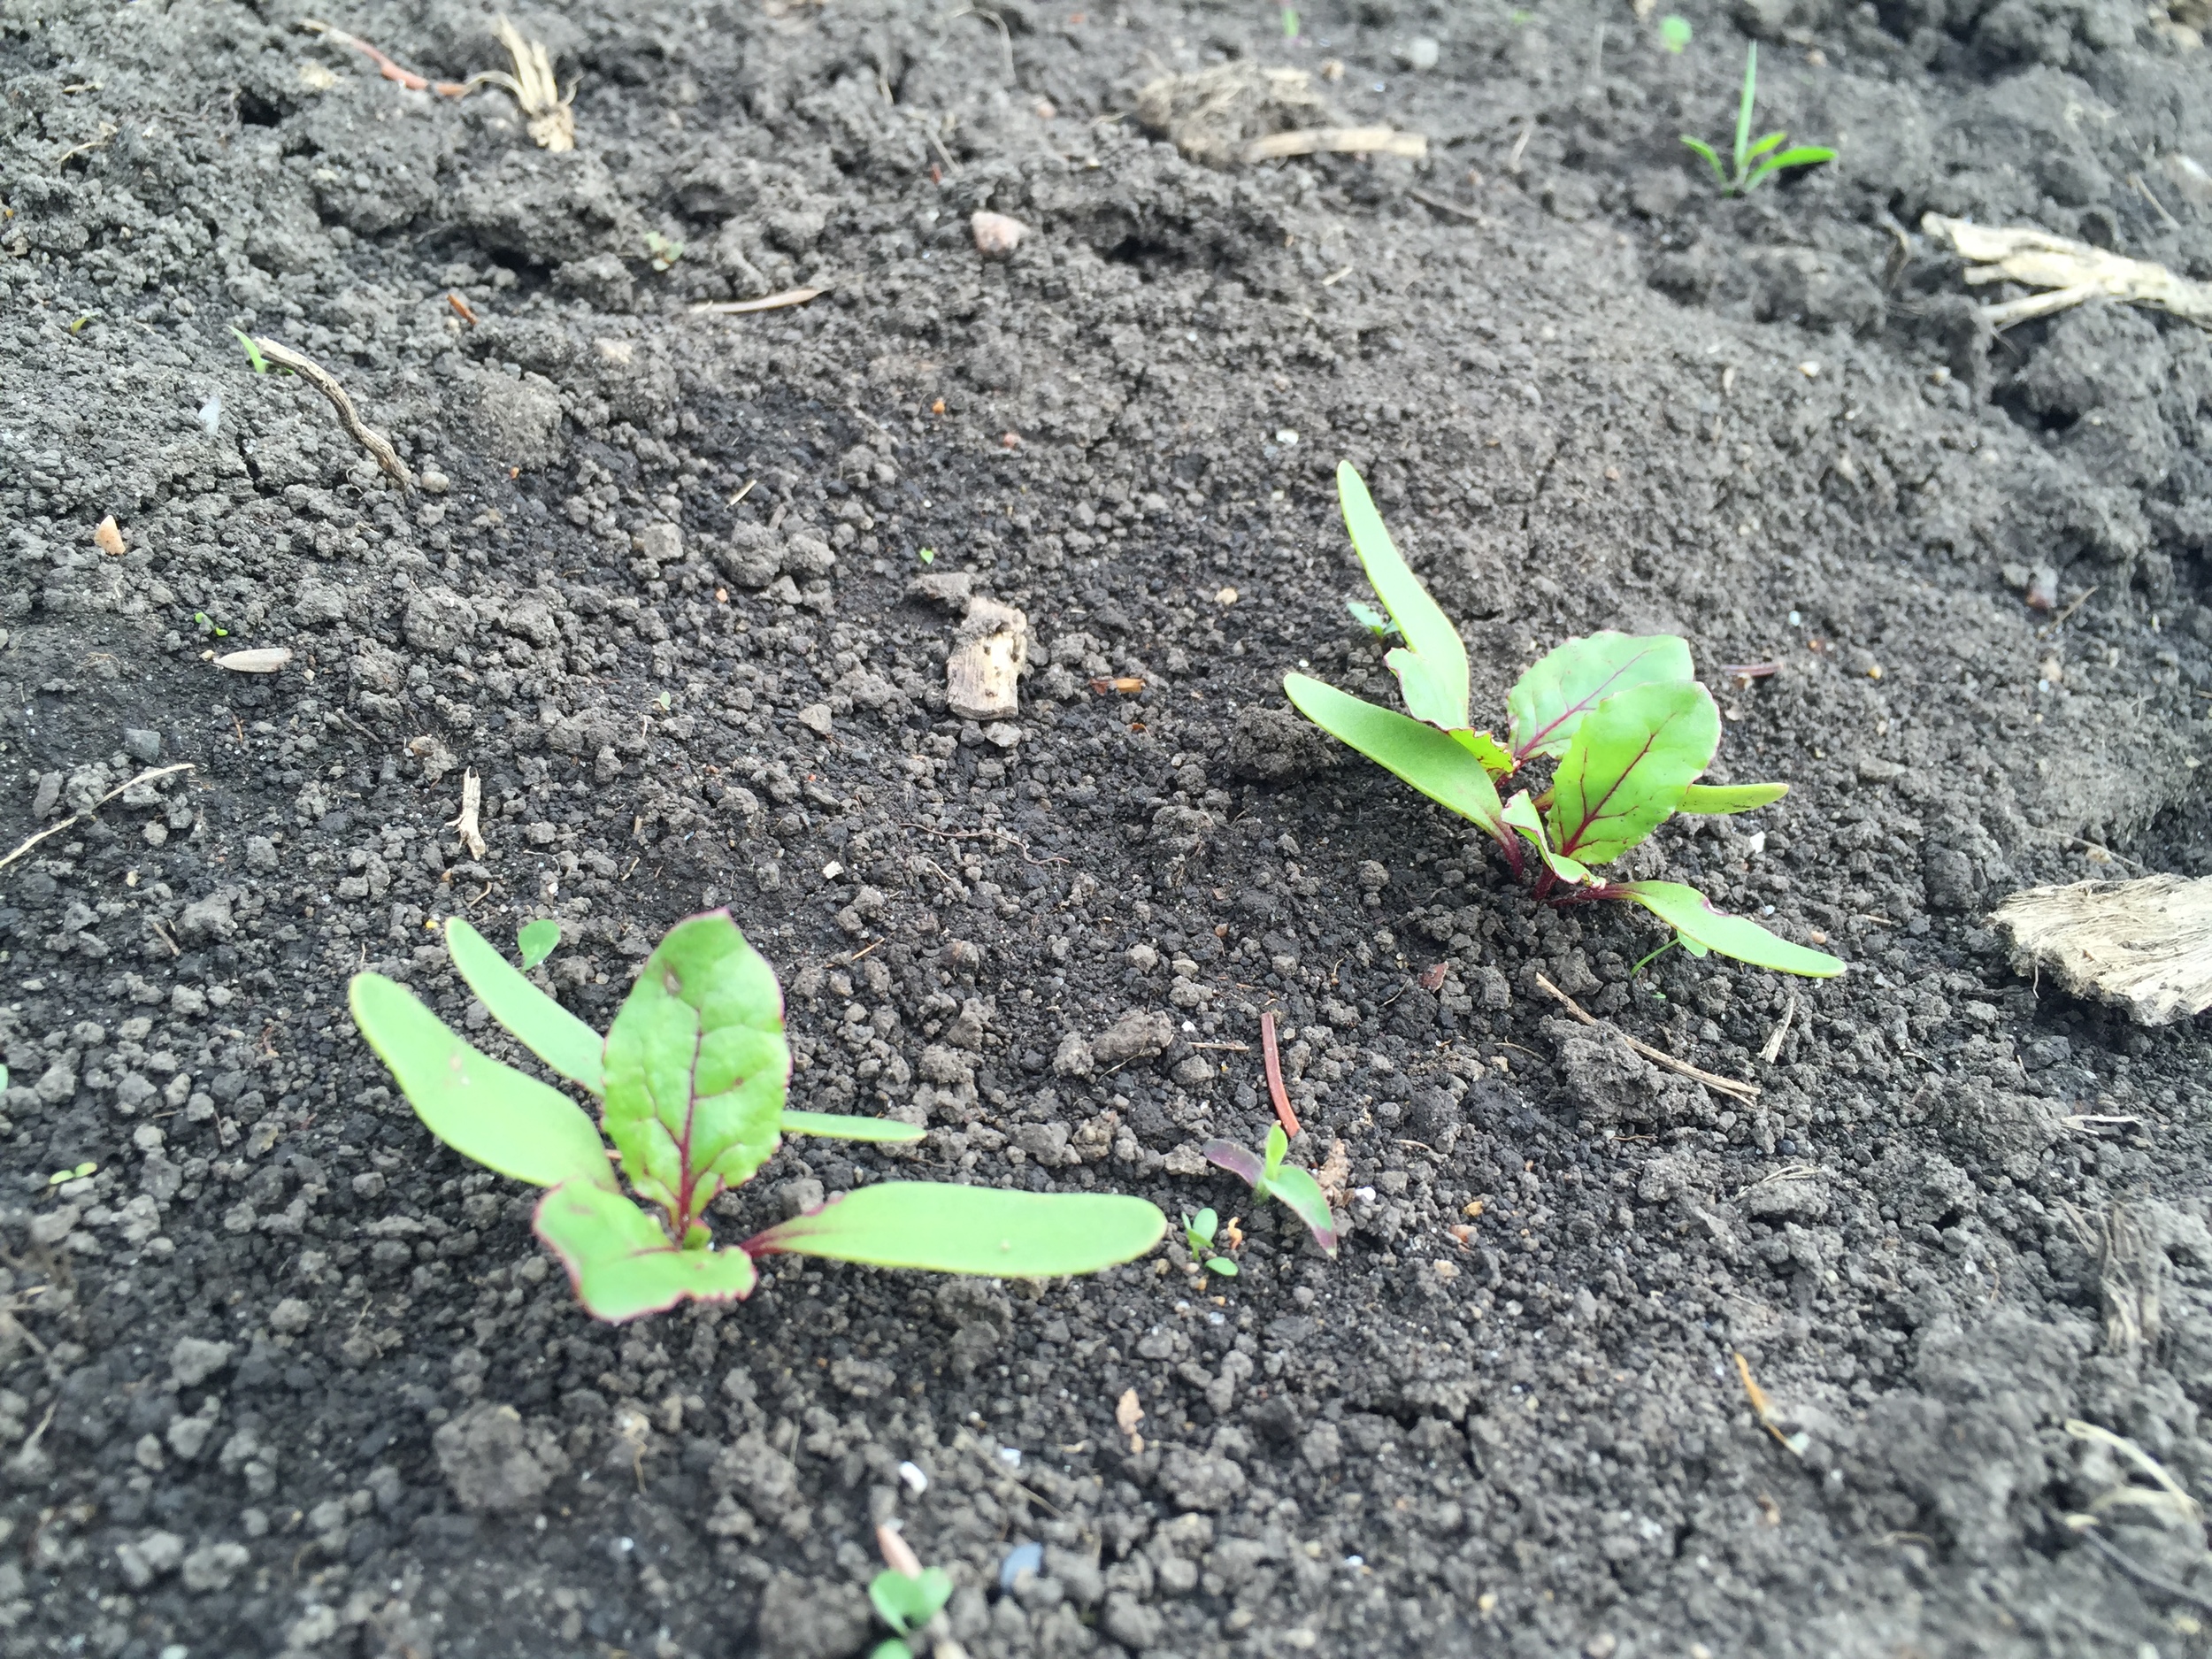  Beets are coming in nicely. 